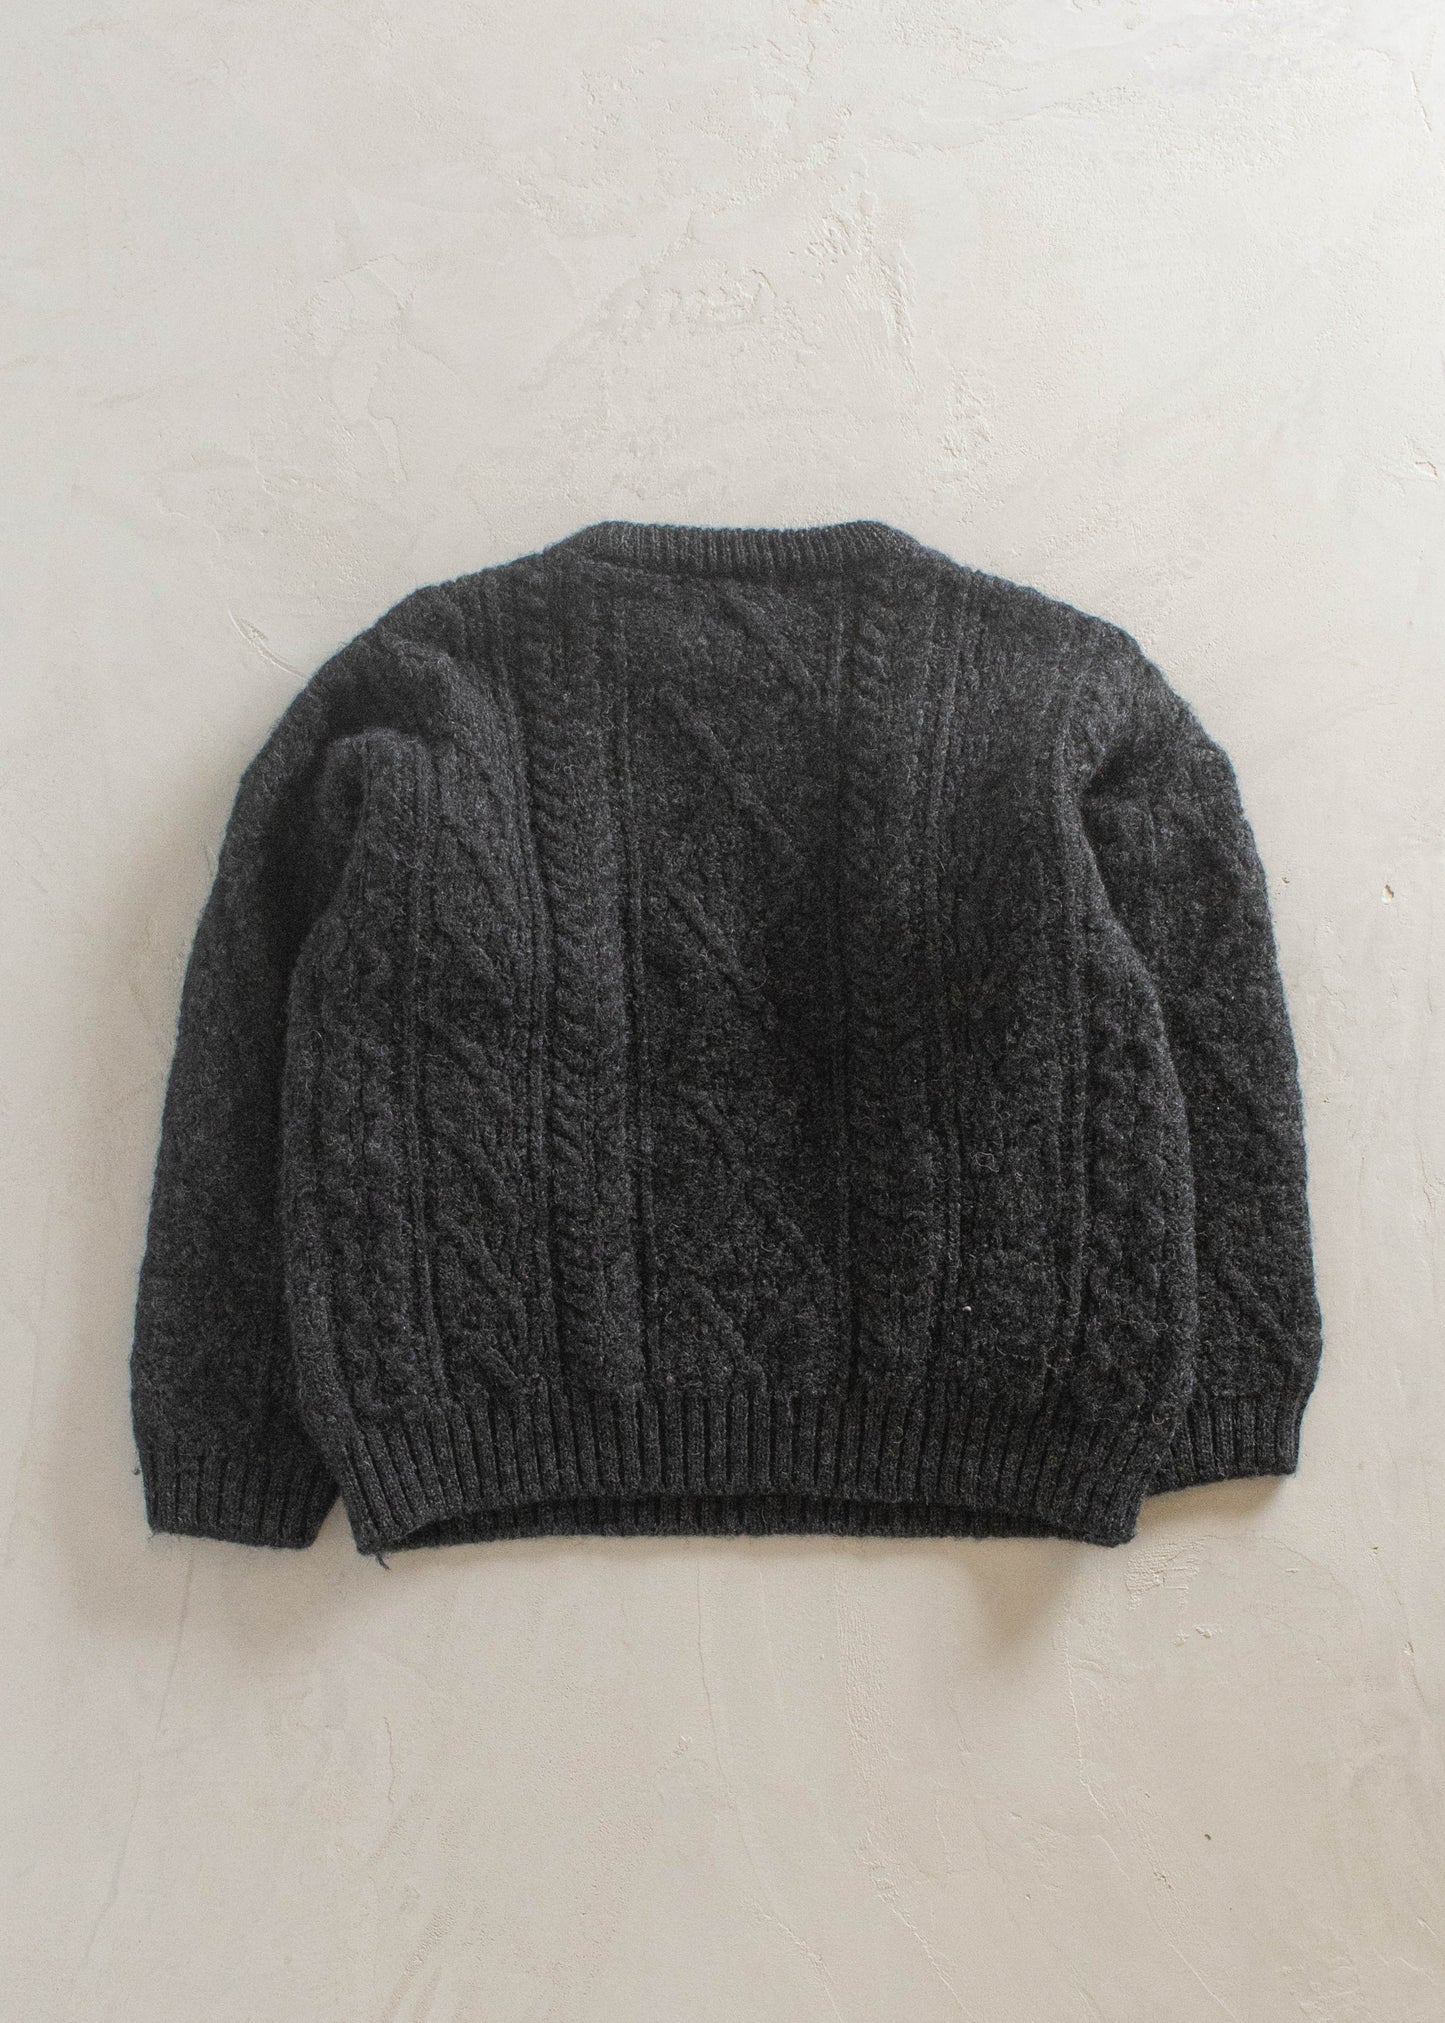 1980s British Wool Cableknit Wool Sweater Size S/M